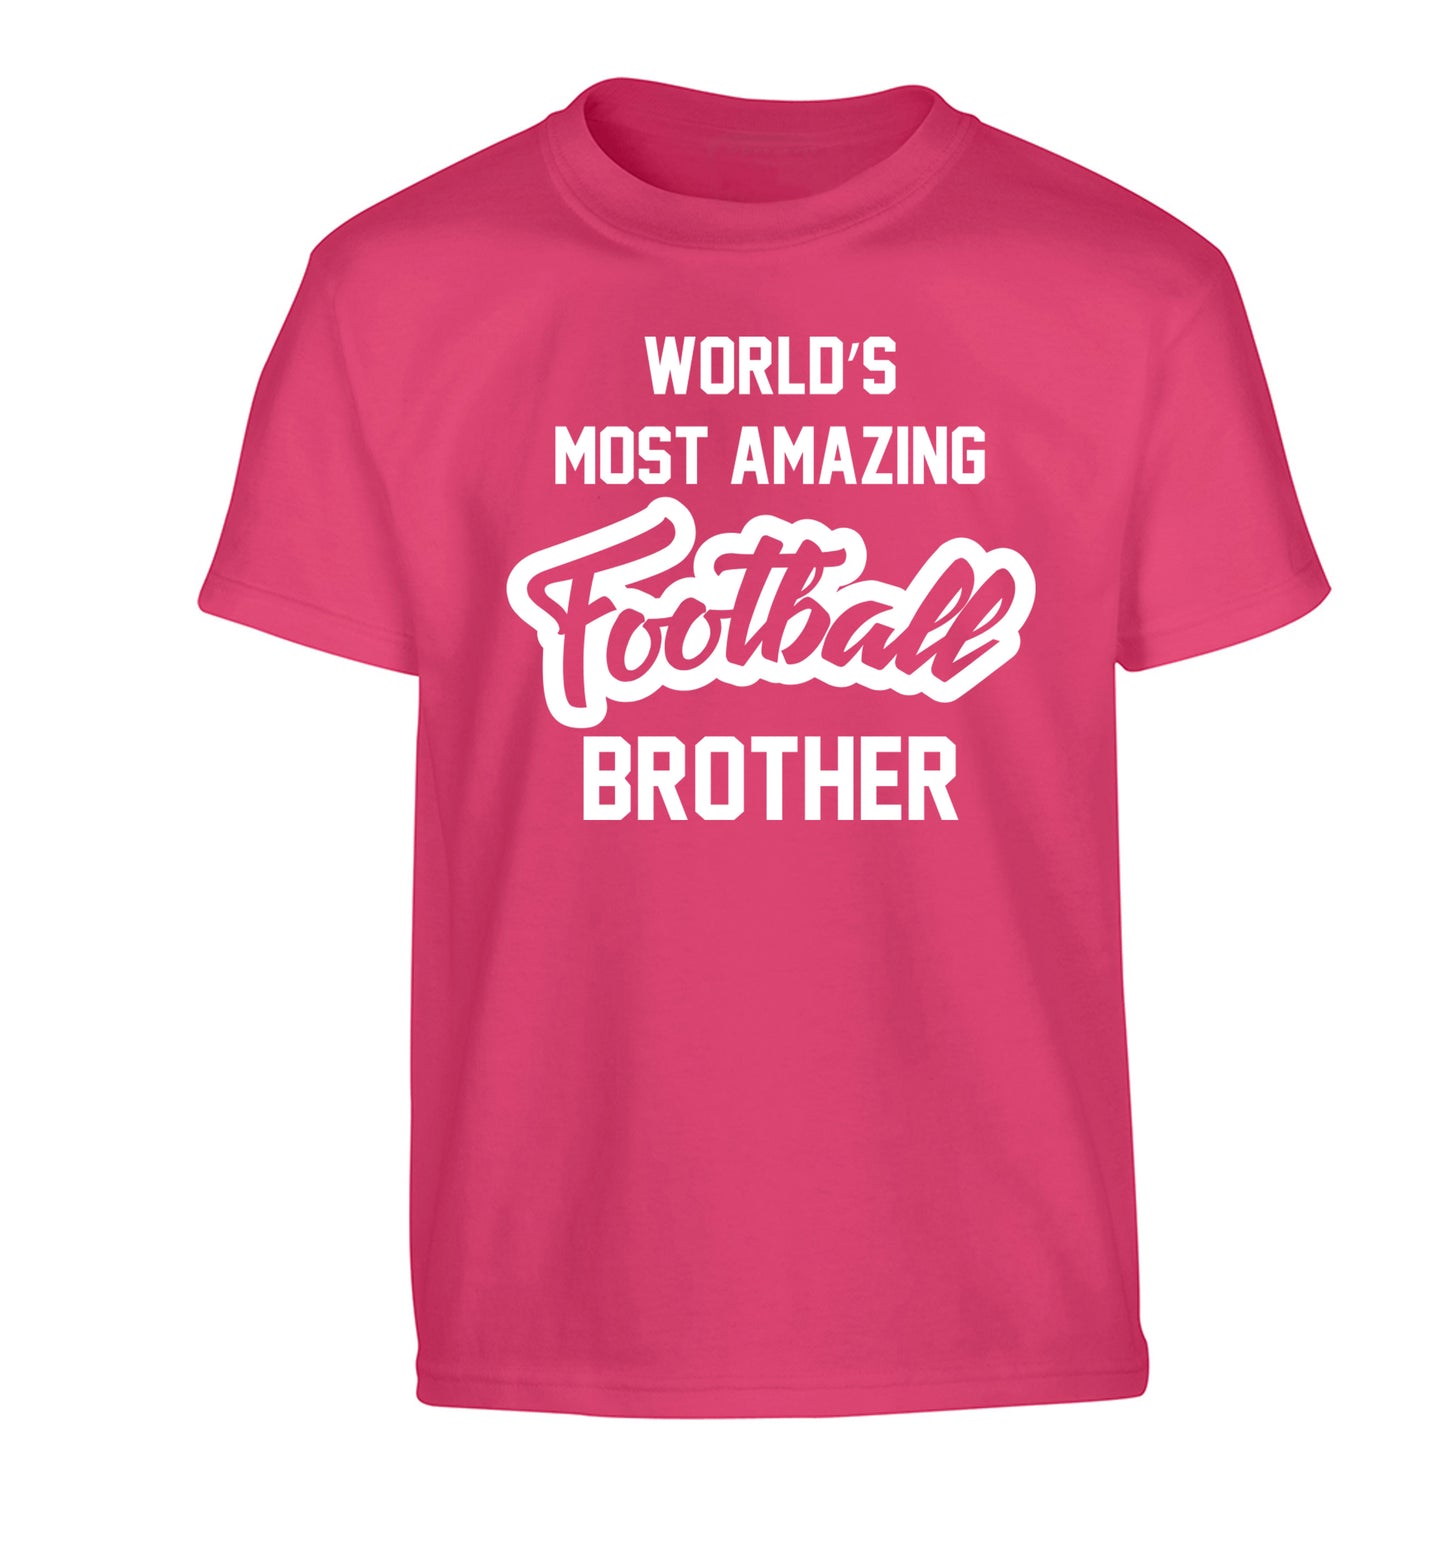 Worlds most amazing football brother Children's pink Tshirt 12-14 Years